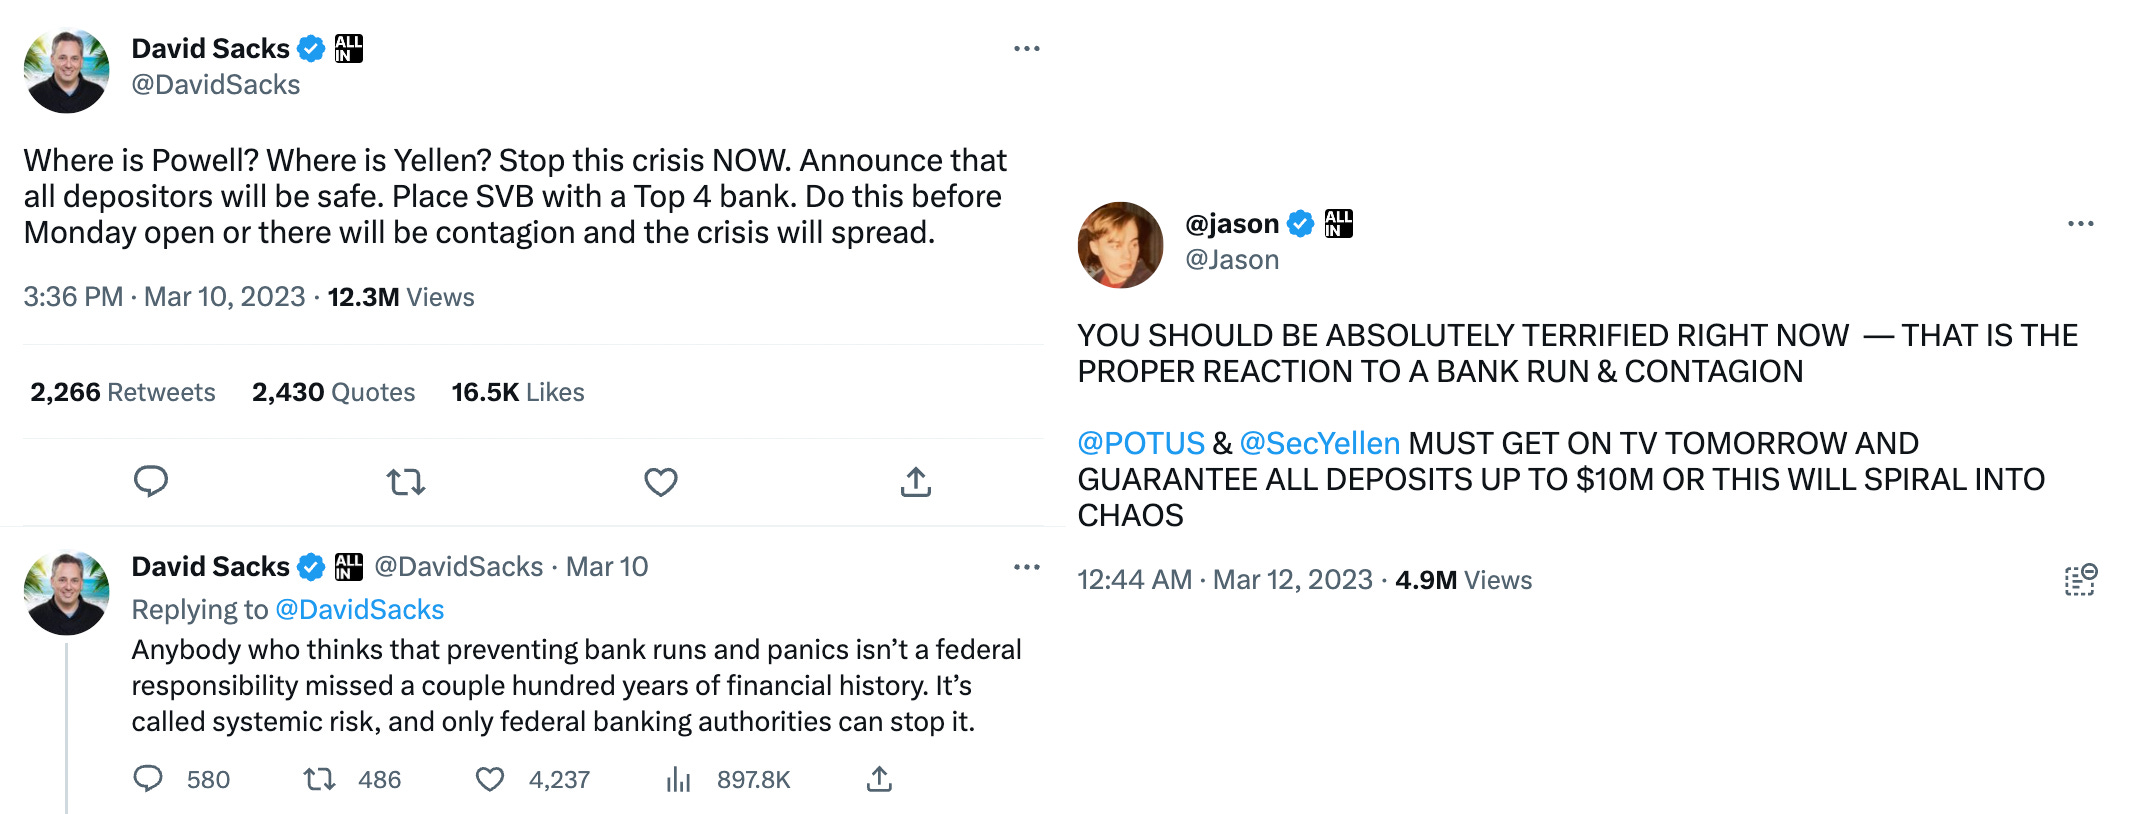 Two sets of tweets, arranged side by side. The first is a two-tweet thread by David Sacks: "Where is Powell? Where is Yellen? Stop this crisis NOW. Announce that all depositors will be safe. Place SVB with a Top 4 bank. Do this before Monday open or there will be contagion and the crisis will spread. Anybody who thinks that preventing bank runs and panics isn’t a federal responsibility missed a couple hundred years of financial history. It’s called systemic risk, and only federal banking authorities can stop it." The second is one tweet by Jason Calacanis, in all capitals: "You should be absolutely terrified right now — that is the proper reaction to a bank run & contagion. @POTUS & @SecYellen must get on TV tomorrow and guarantee all deposits up to $10m or this will spiral into chaos"